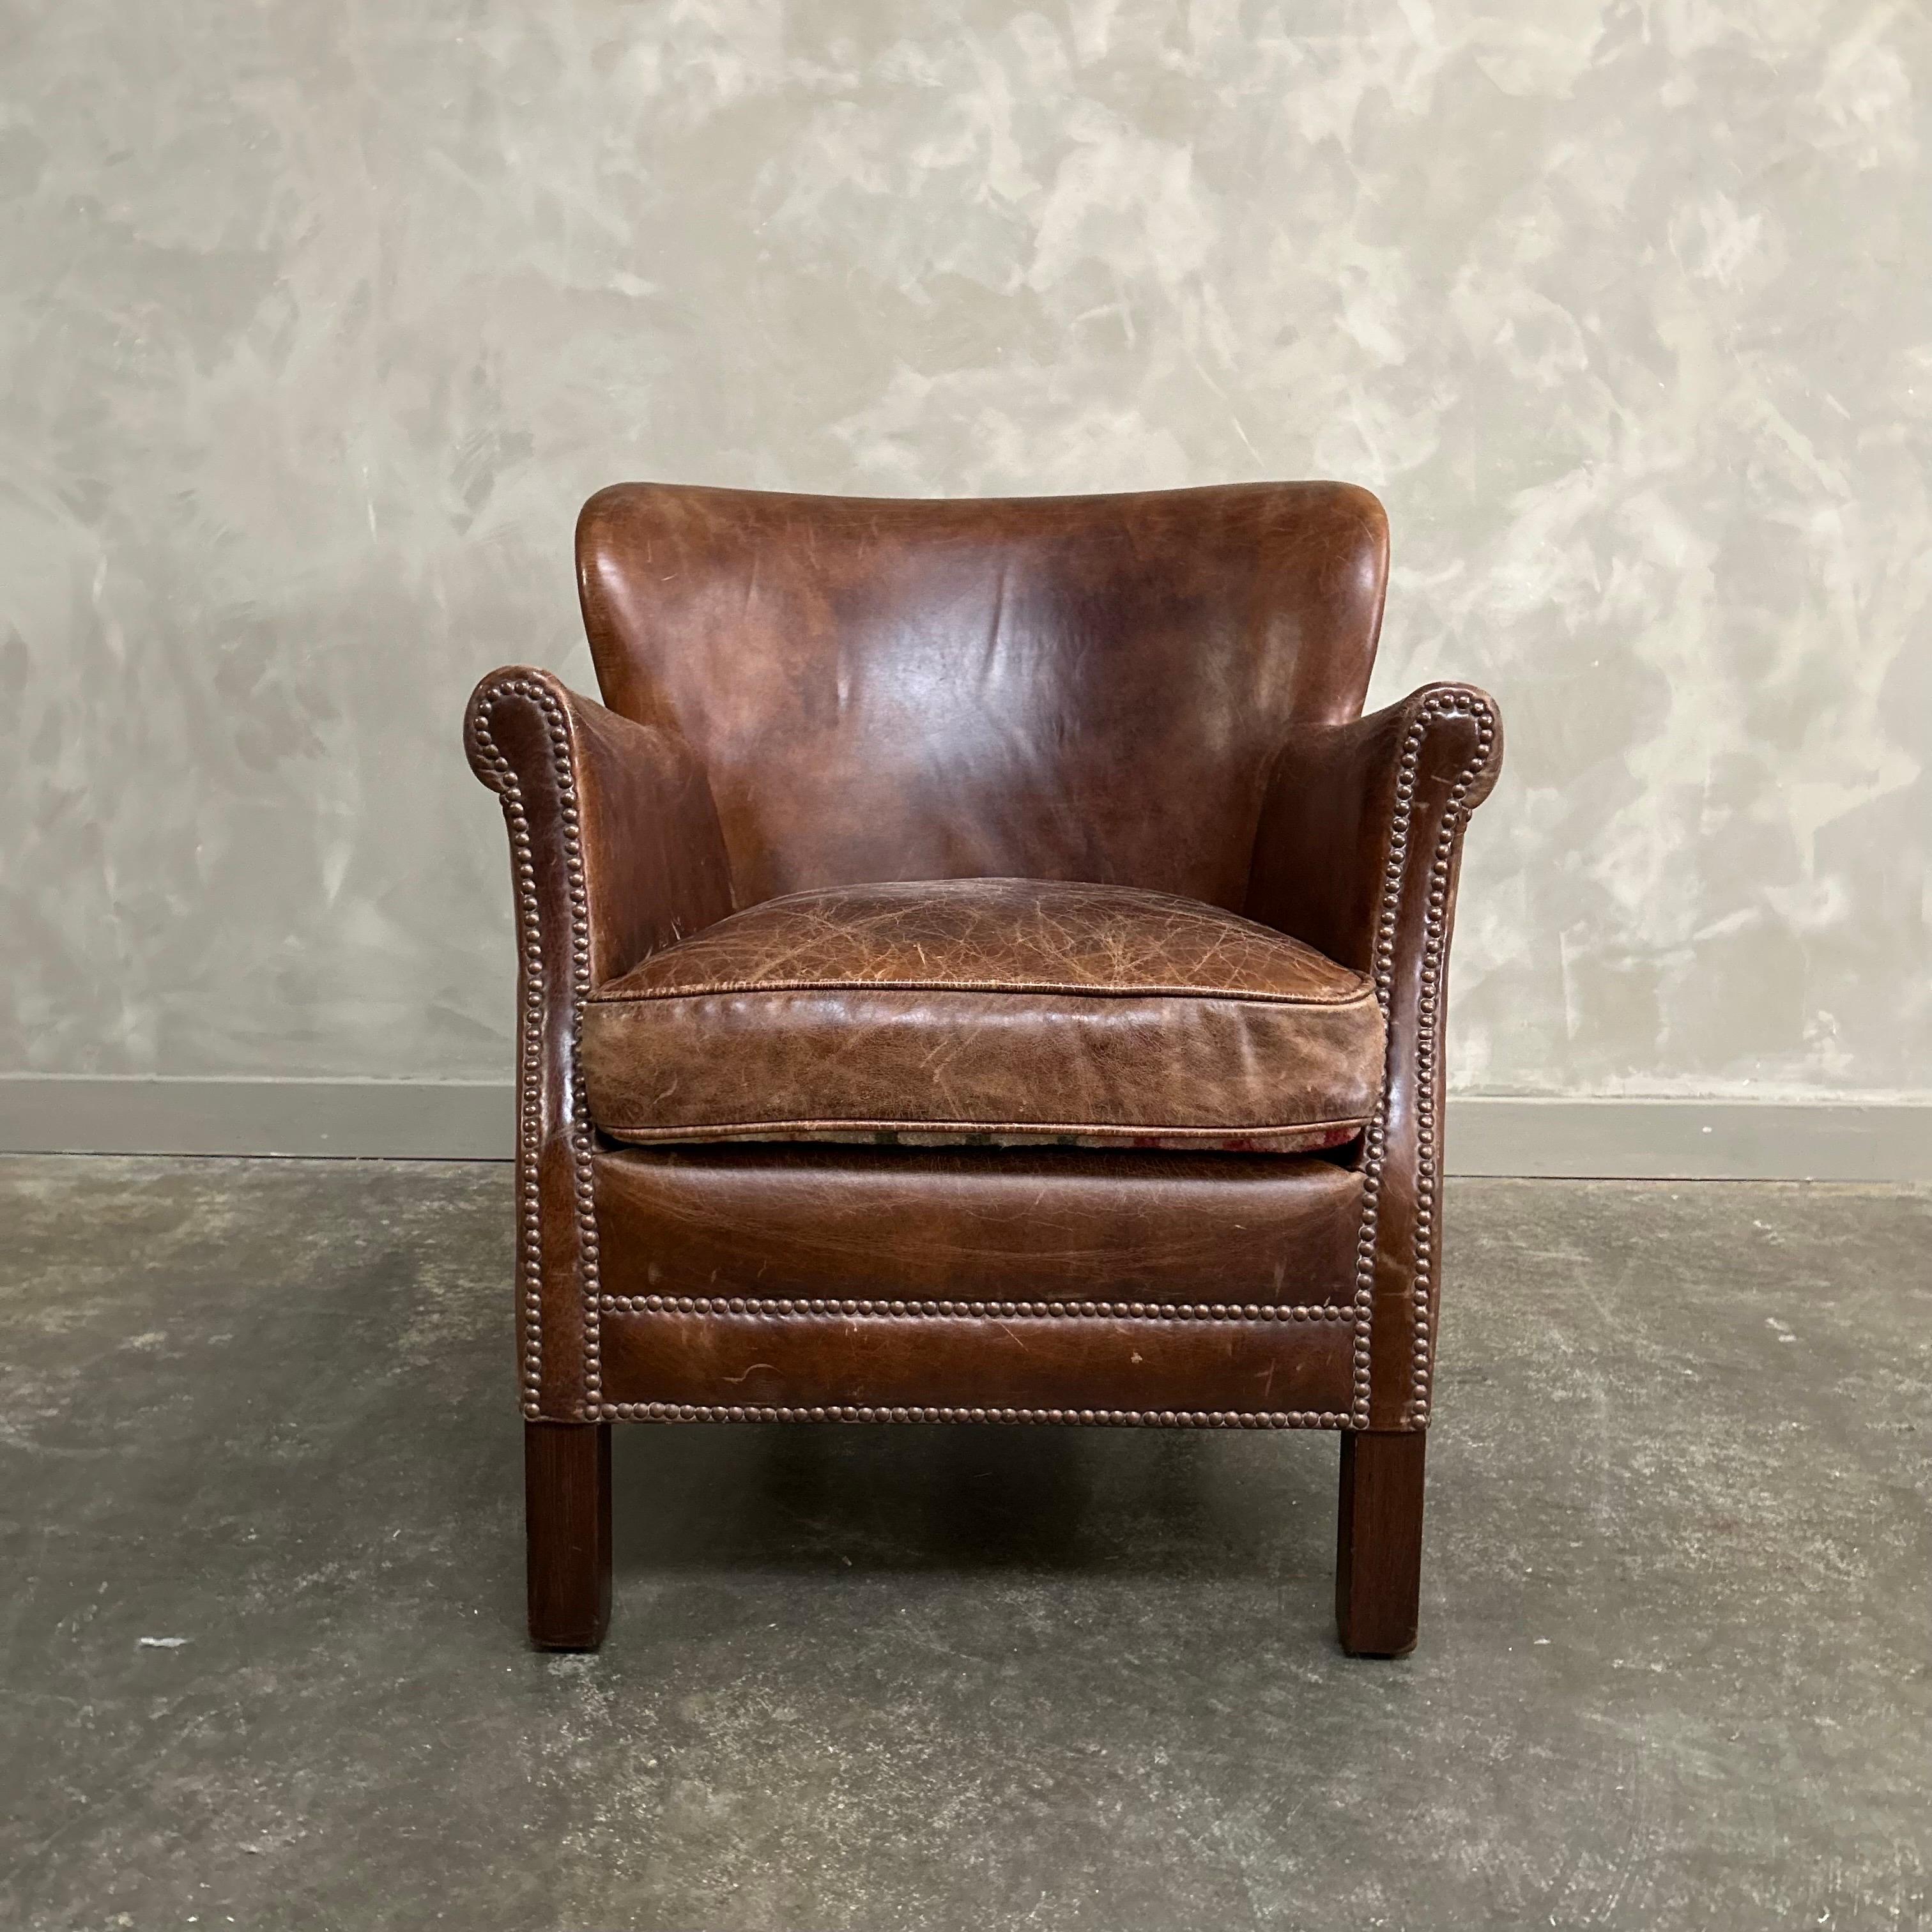 English leather club chair is small in stature, grand in style, this vintage chair provides all the presence and comfort of a larger chair. A 1920s English wing chair, its petite proportions and enveloping embrace offer seating on a more intimate